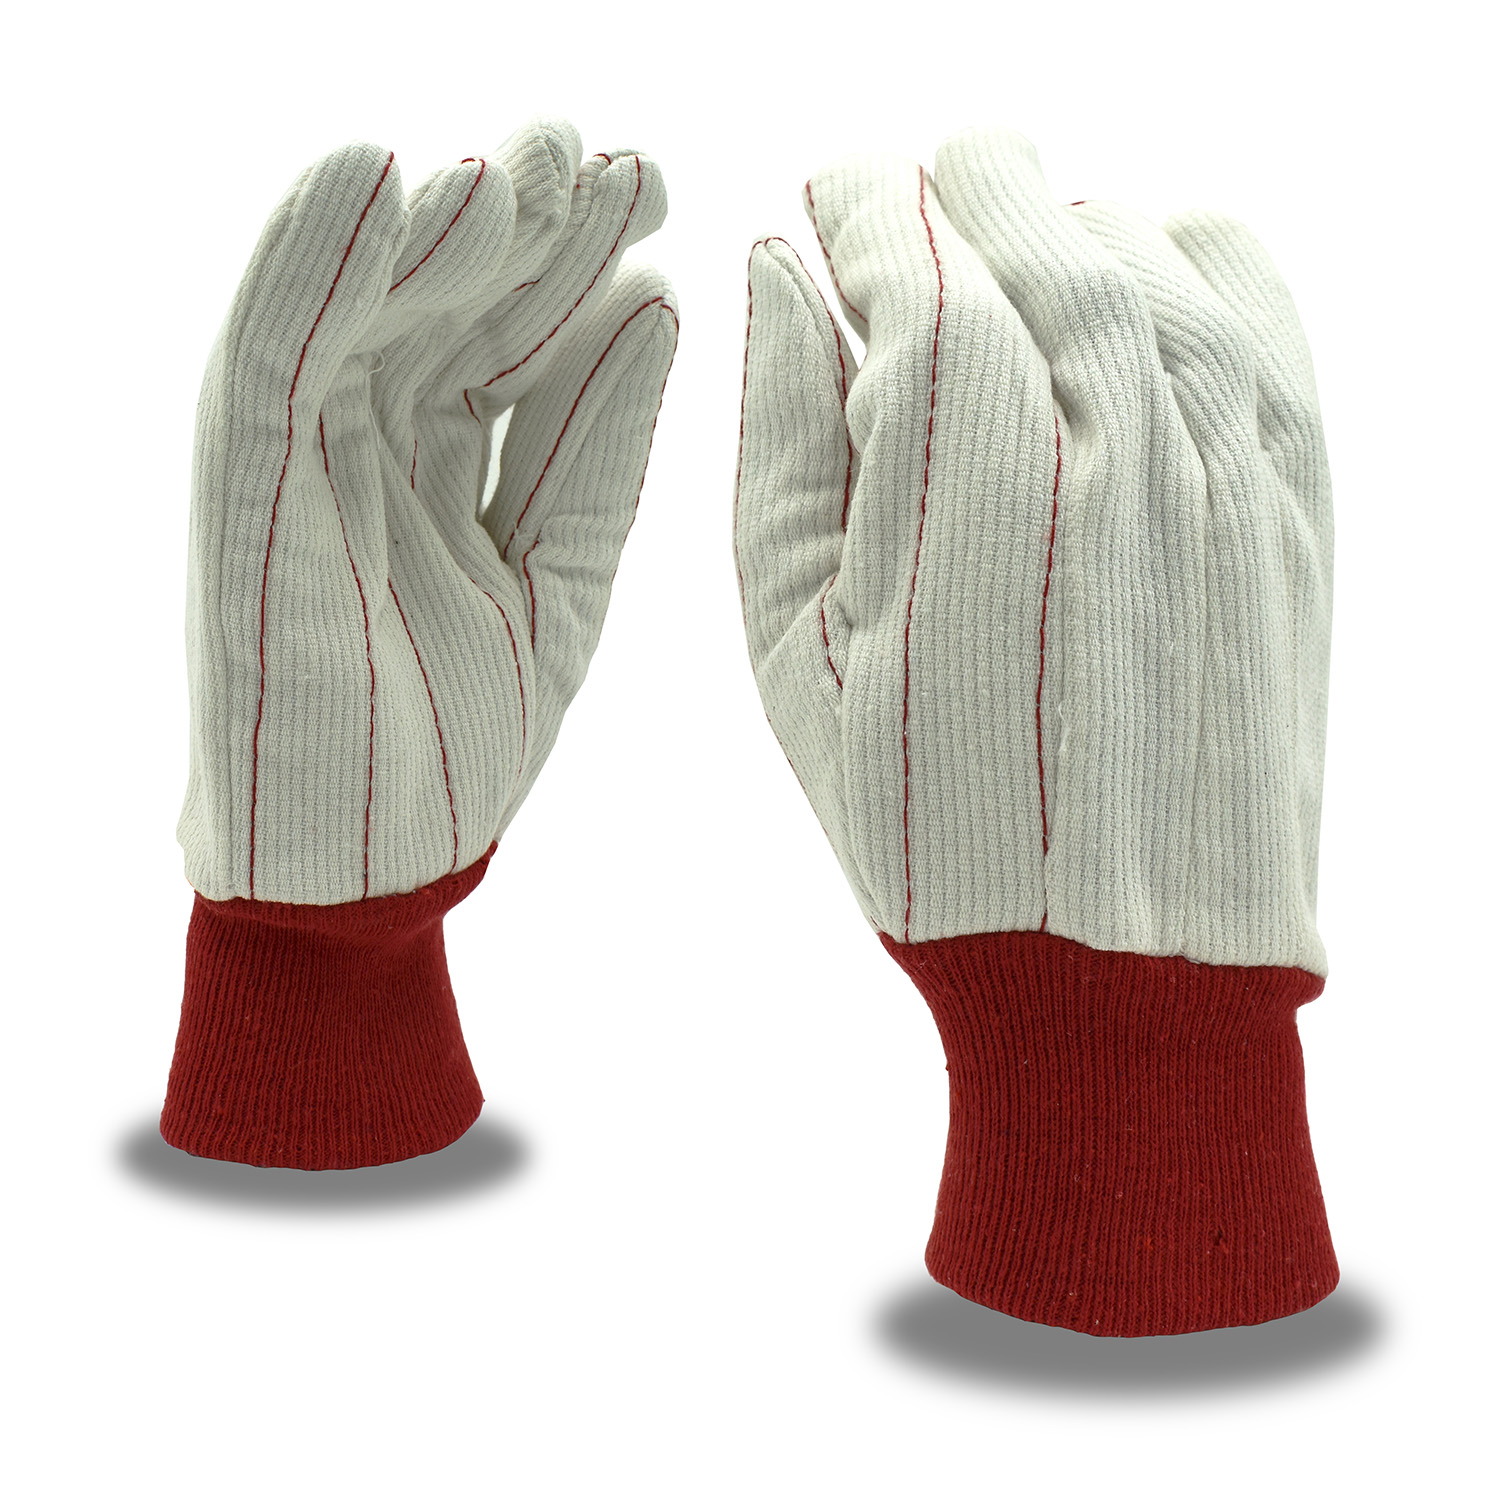 Canvas, Knit Wrist, Corded, Double Palm: #2435CDR